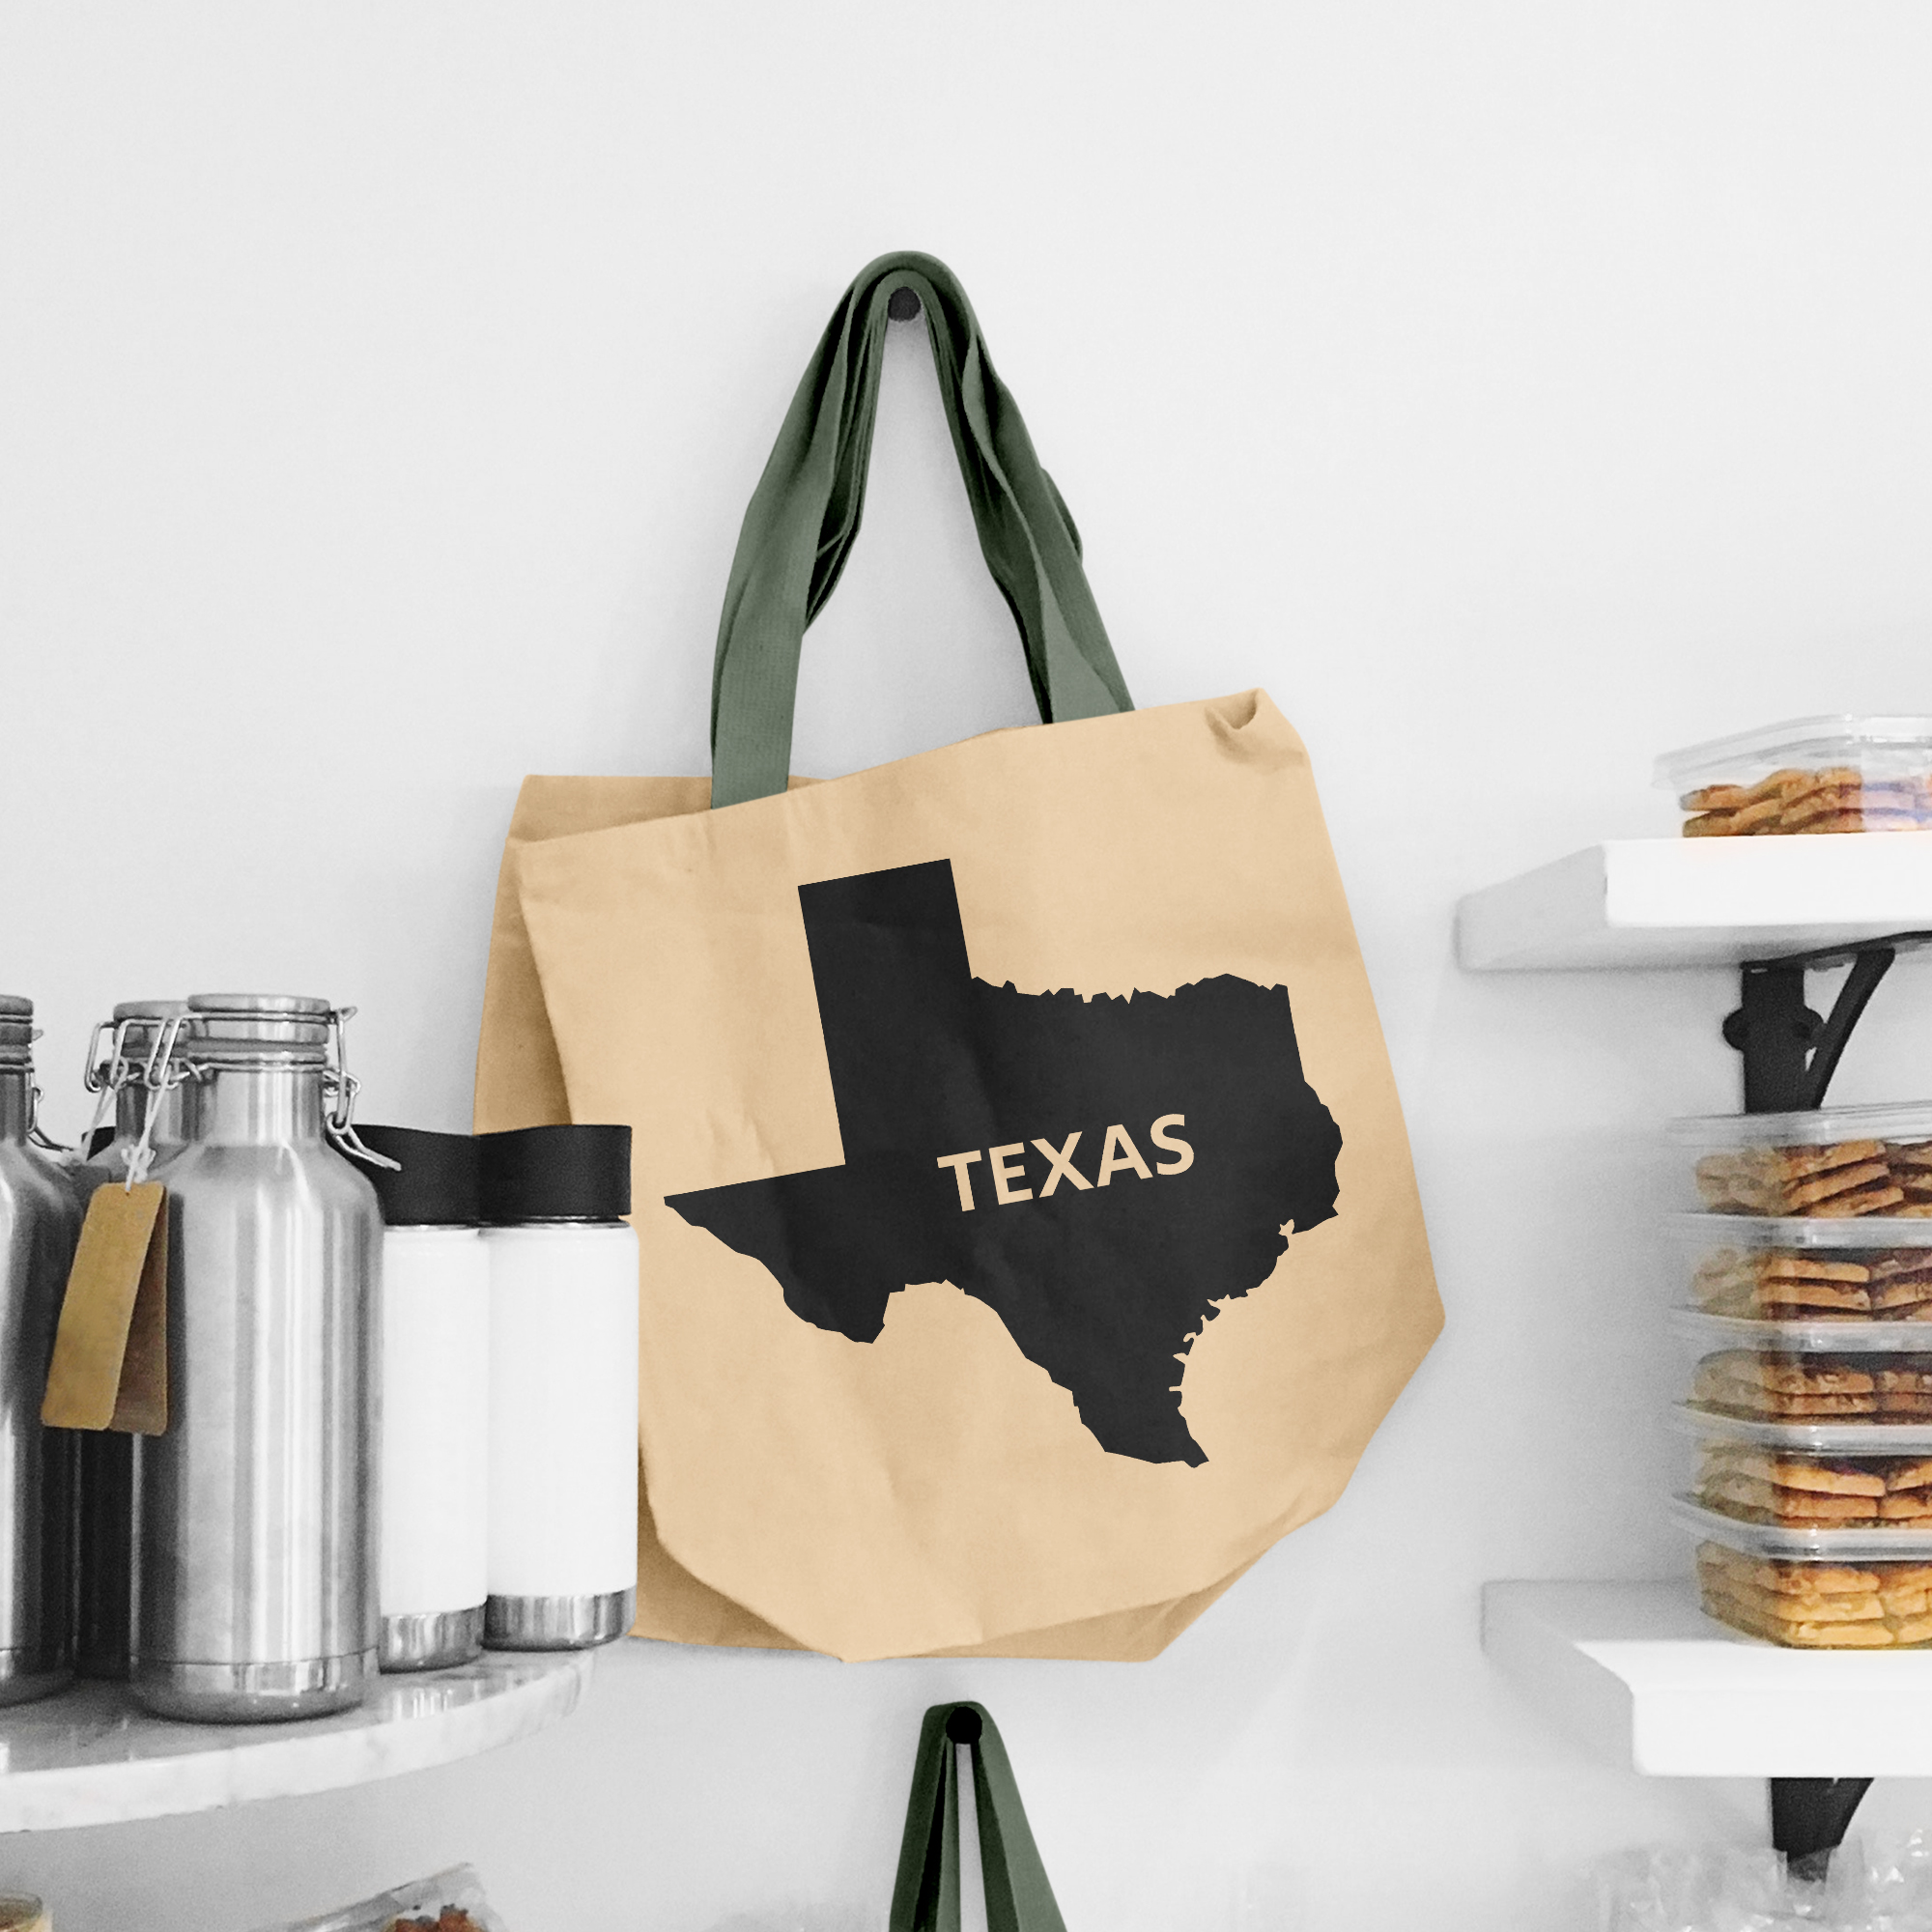 Black illustration of map of Texas and lettering "Texas" on the beige shopping bag with dirty green handle.